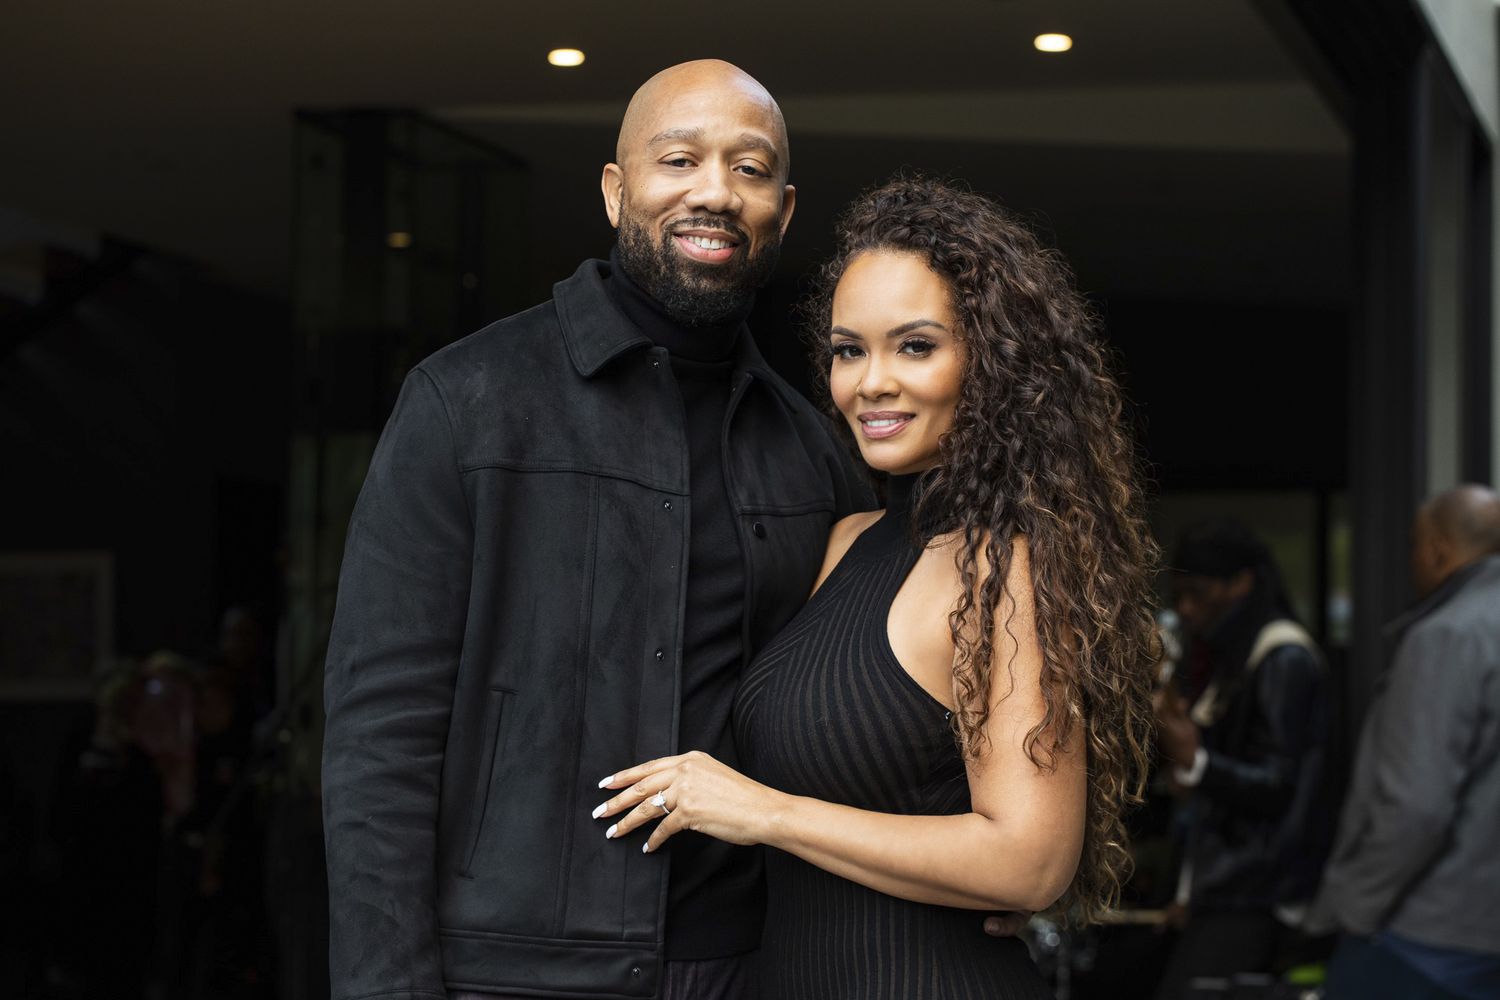 Basketball Wives' Evelyn Lozada and Lavon Lewis End Engagement